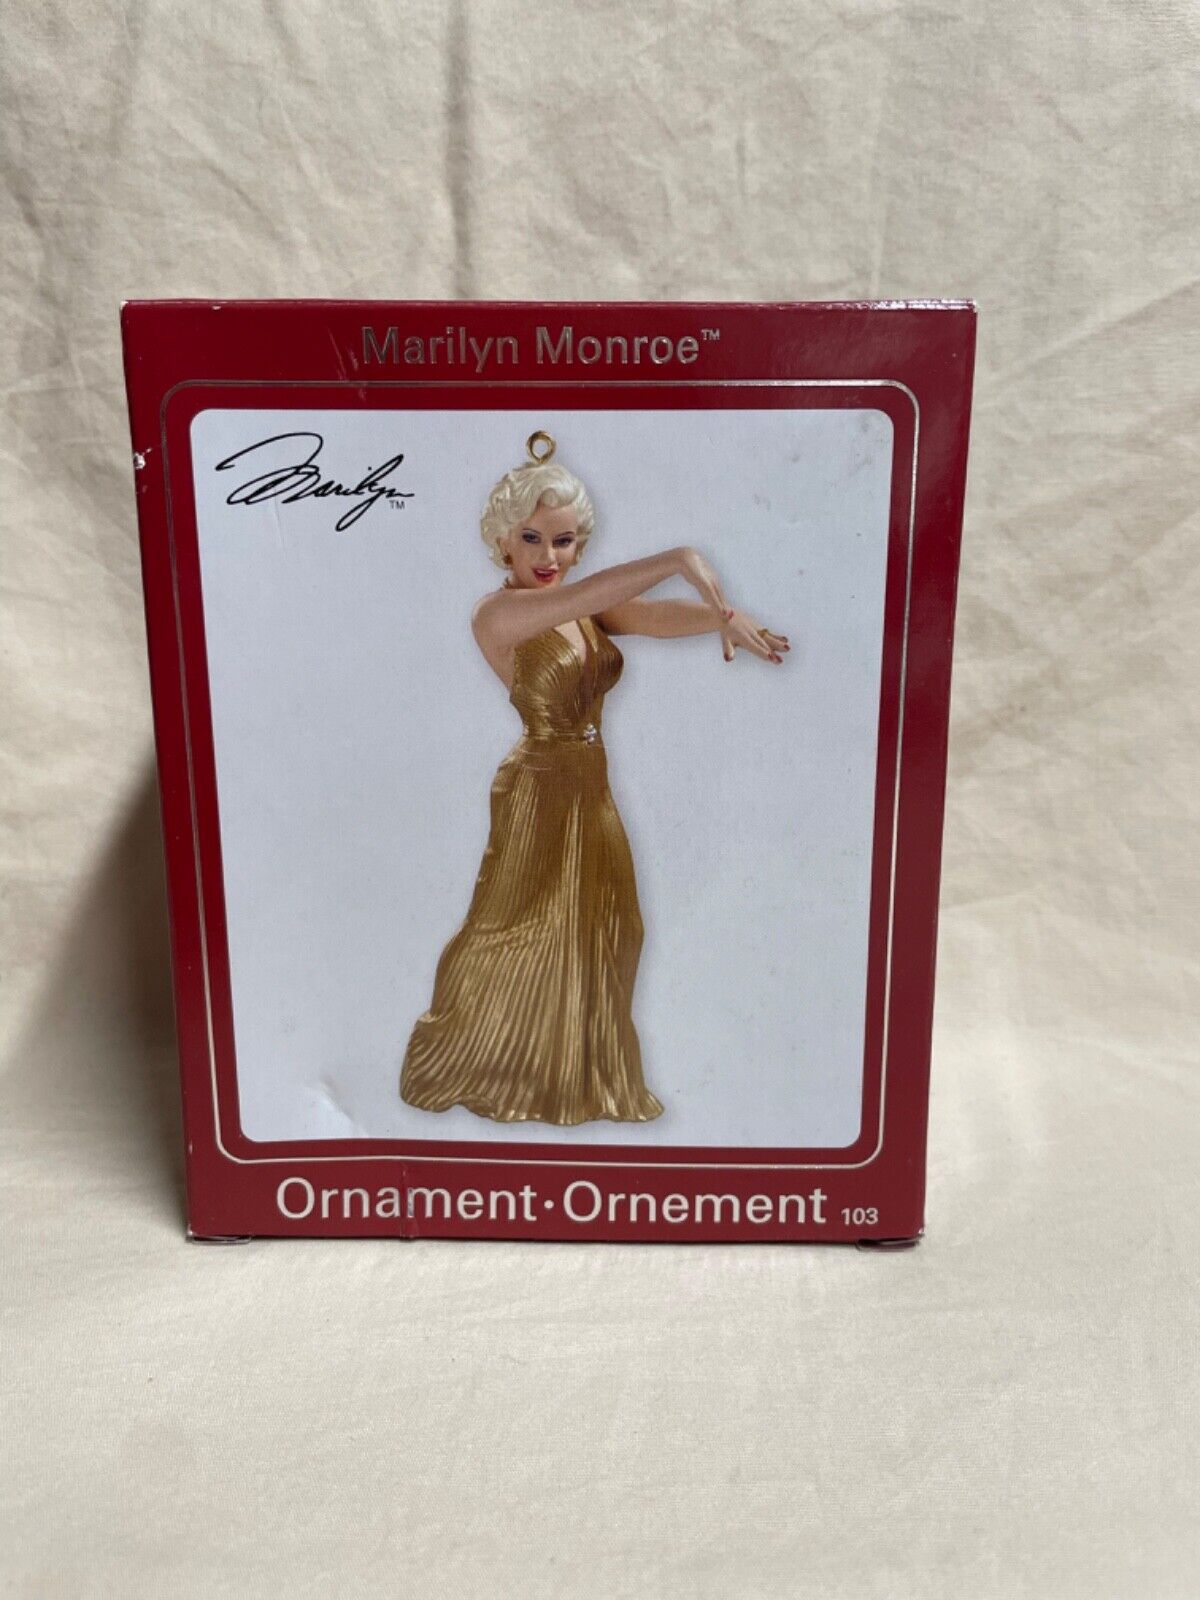 Heirloom Ornament Collection 103 Marilyn Monroe Collectible Christmas Ornament